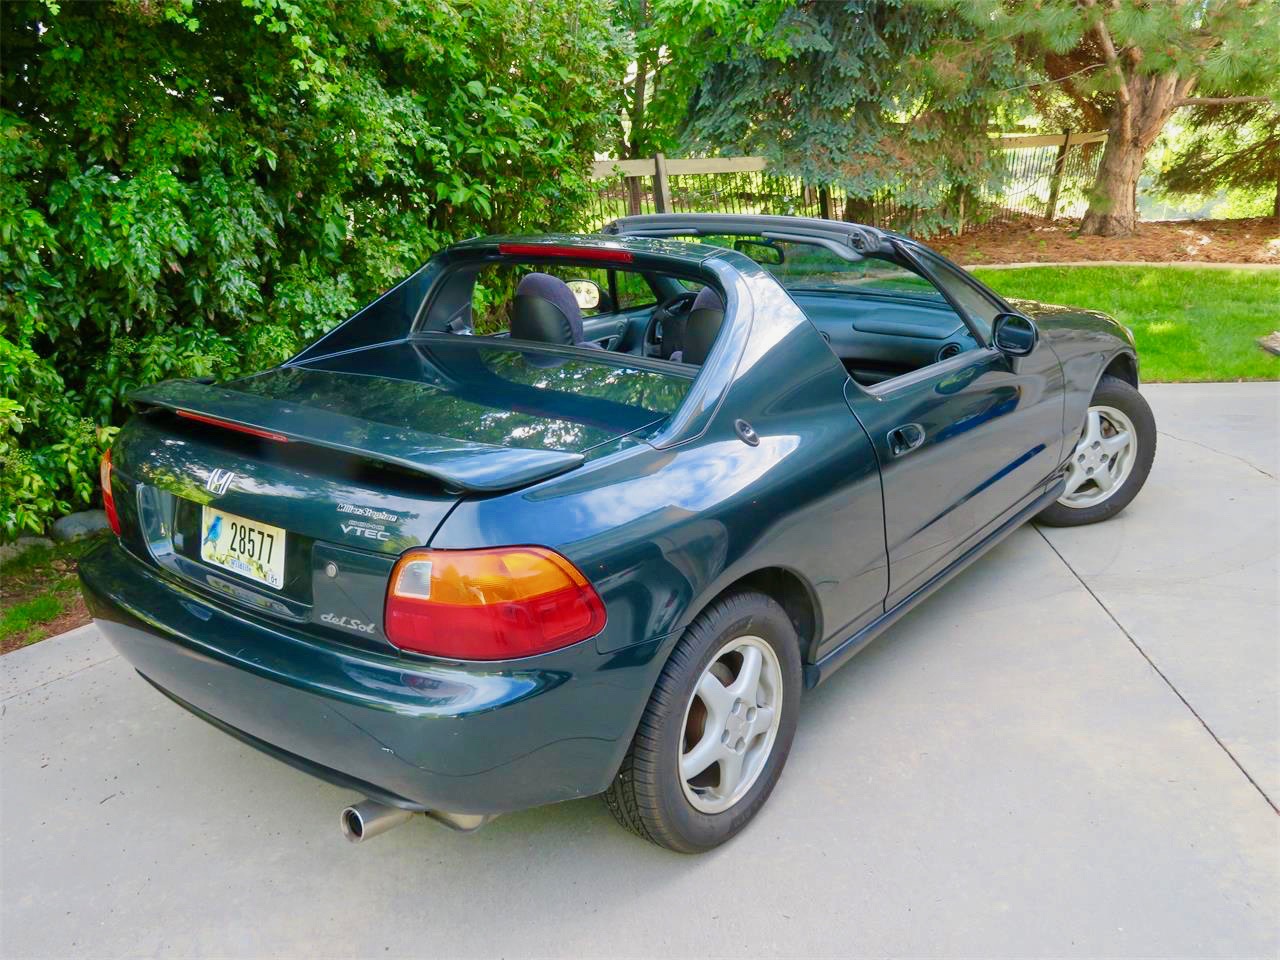 1995 Honda Del Sol Ready For Another Margaritaville Tour